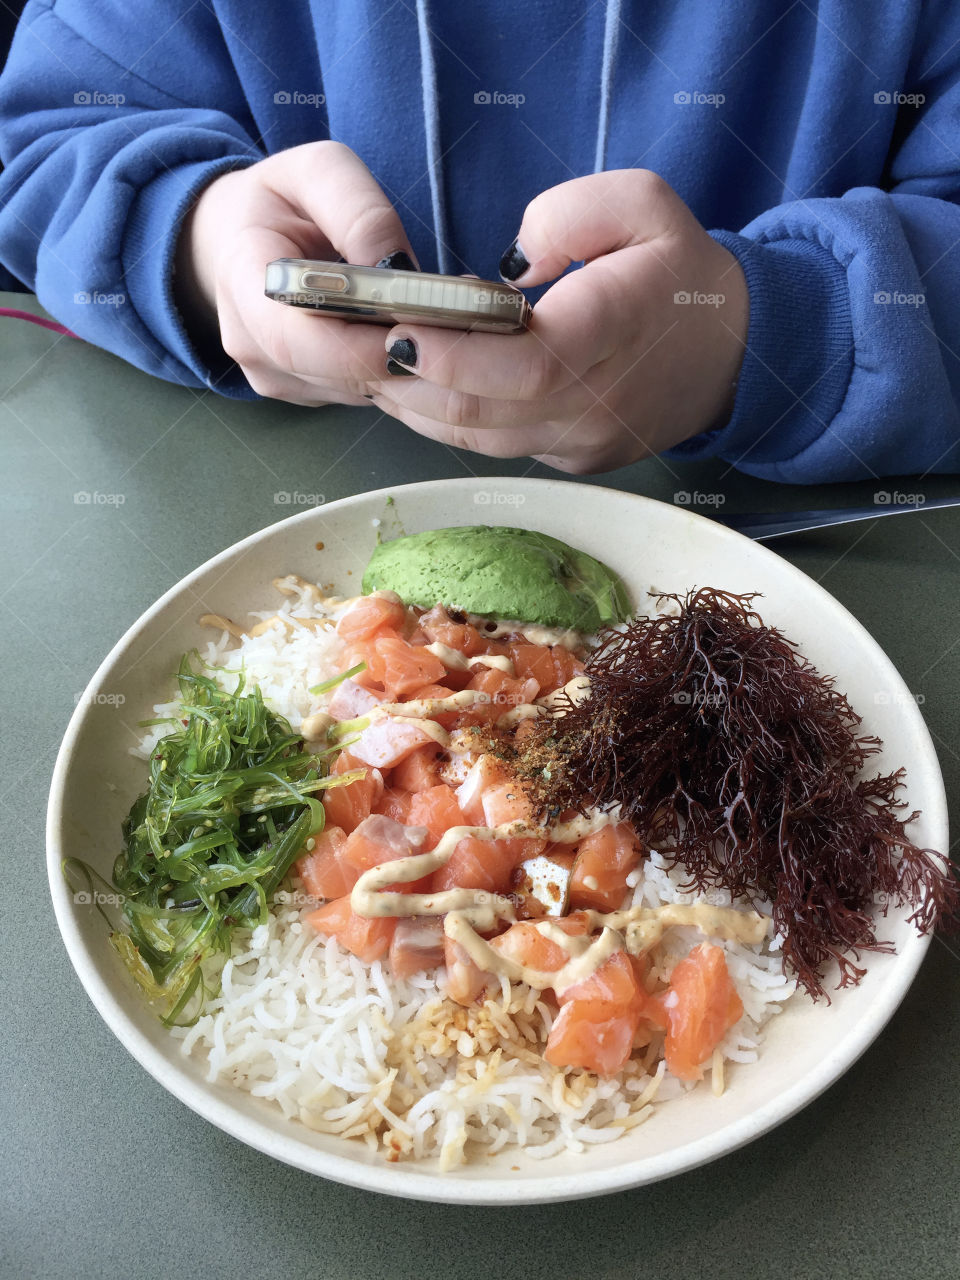 A person using cellphone at the restaurant 